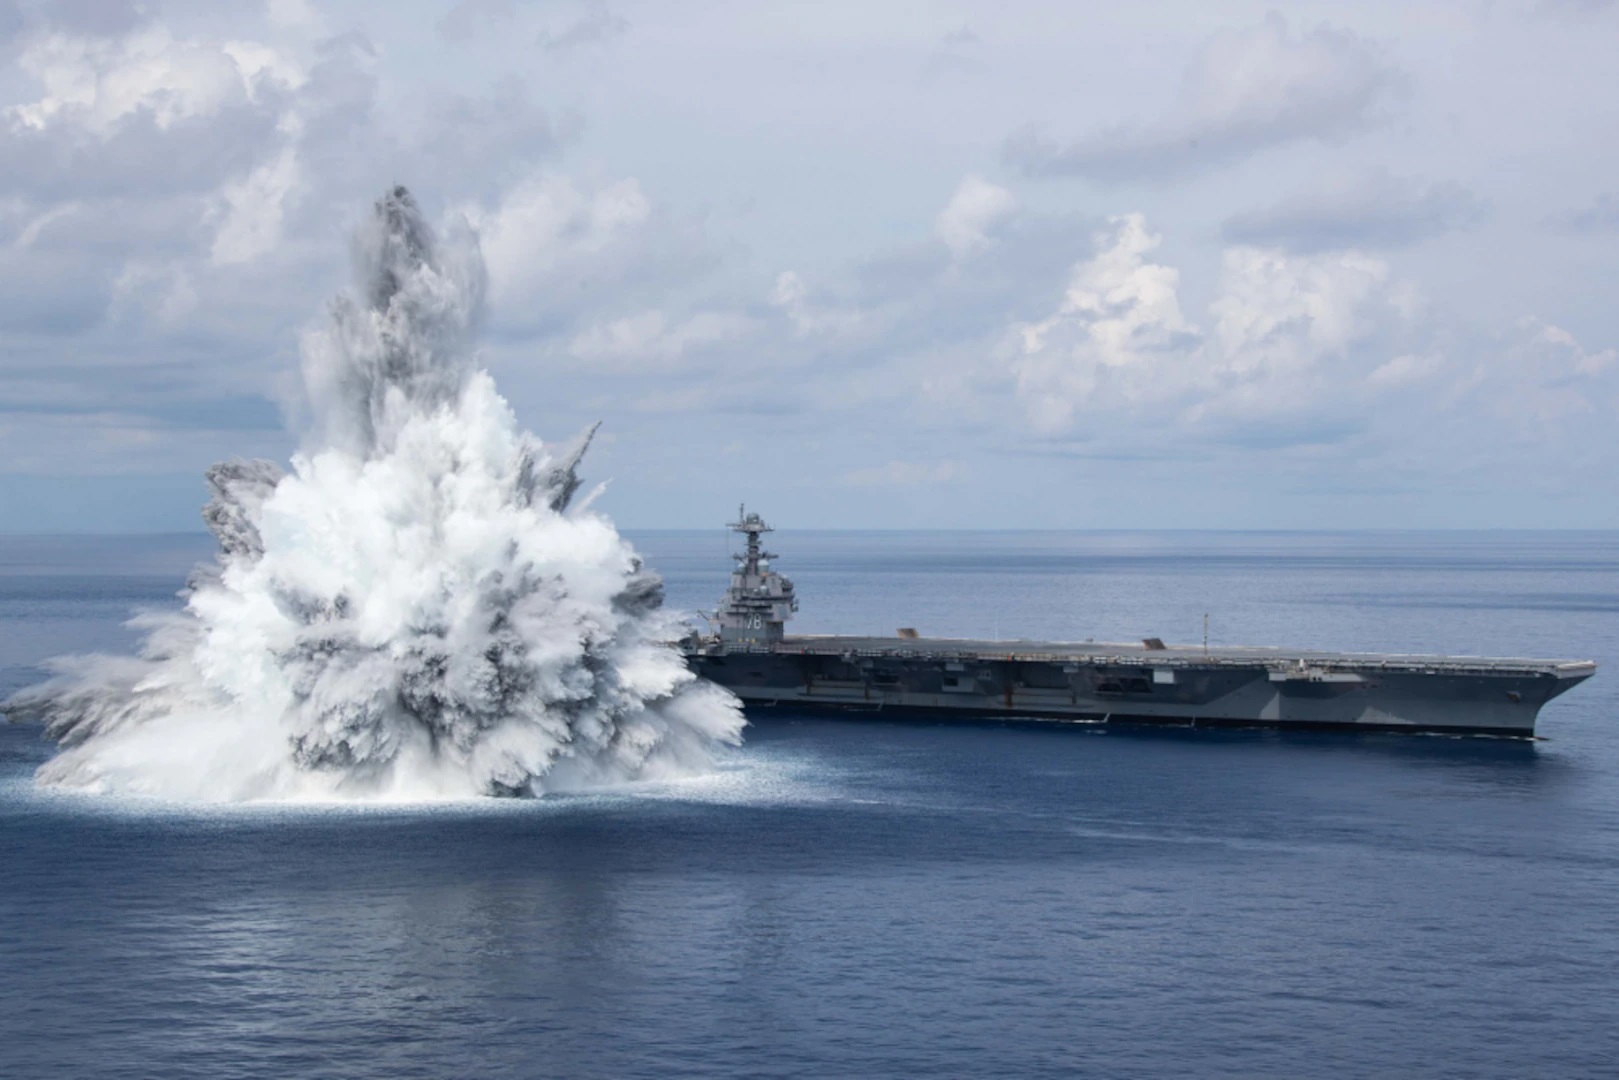 Aircraft carrier USS Gerald R. Ford (CVN 78) successfully completes the third and final scheduled explosive event for Full Ship Shock Trials while underway in the Atlantic Ocean, August 8, 2021